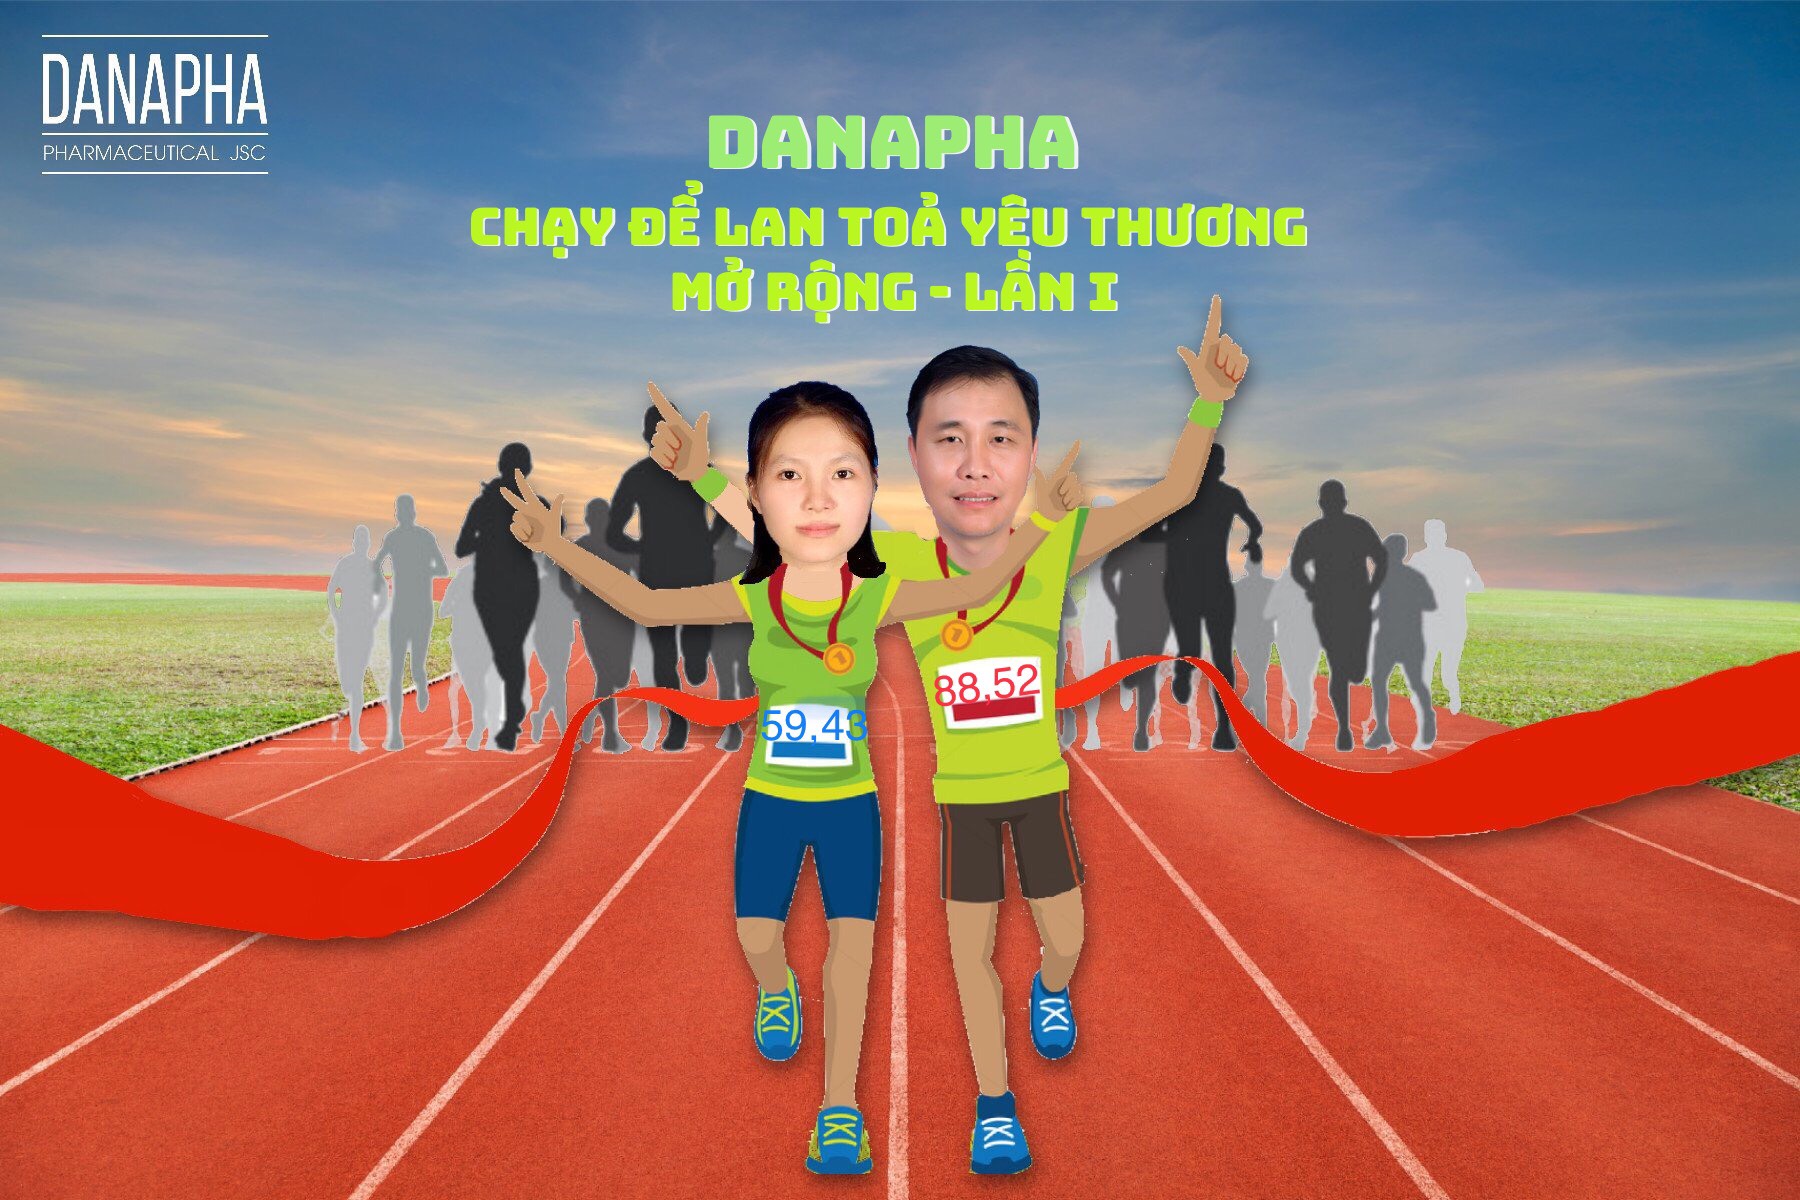 SUMMARY OF THE OPEN COMPETITION "DANAPHA - RUN TO SPREAD LOVE" - 1st time